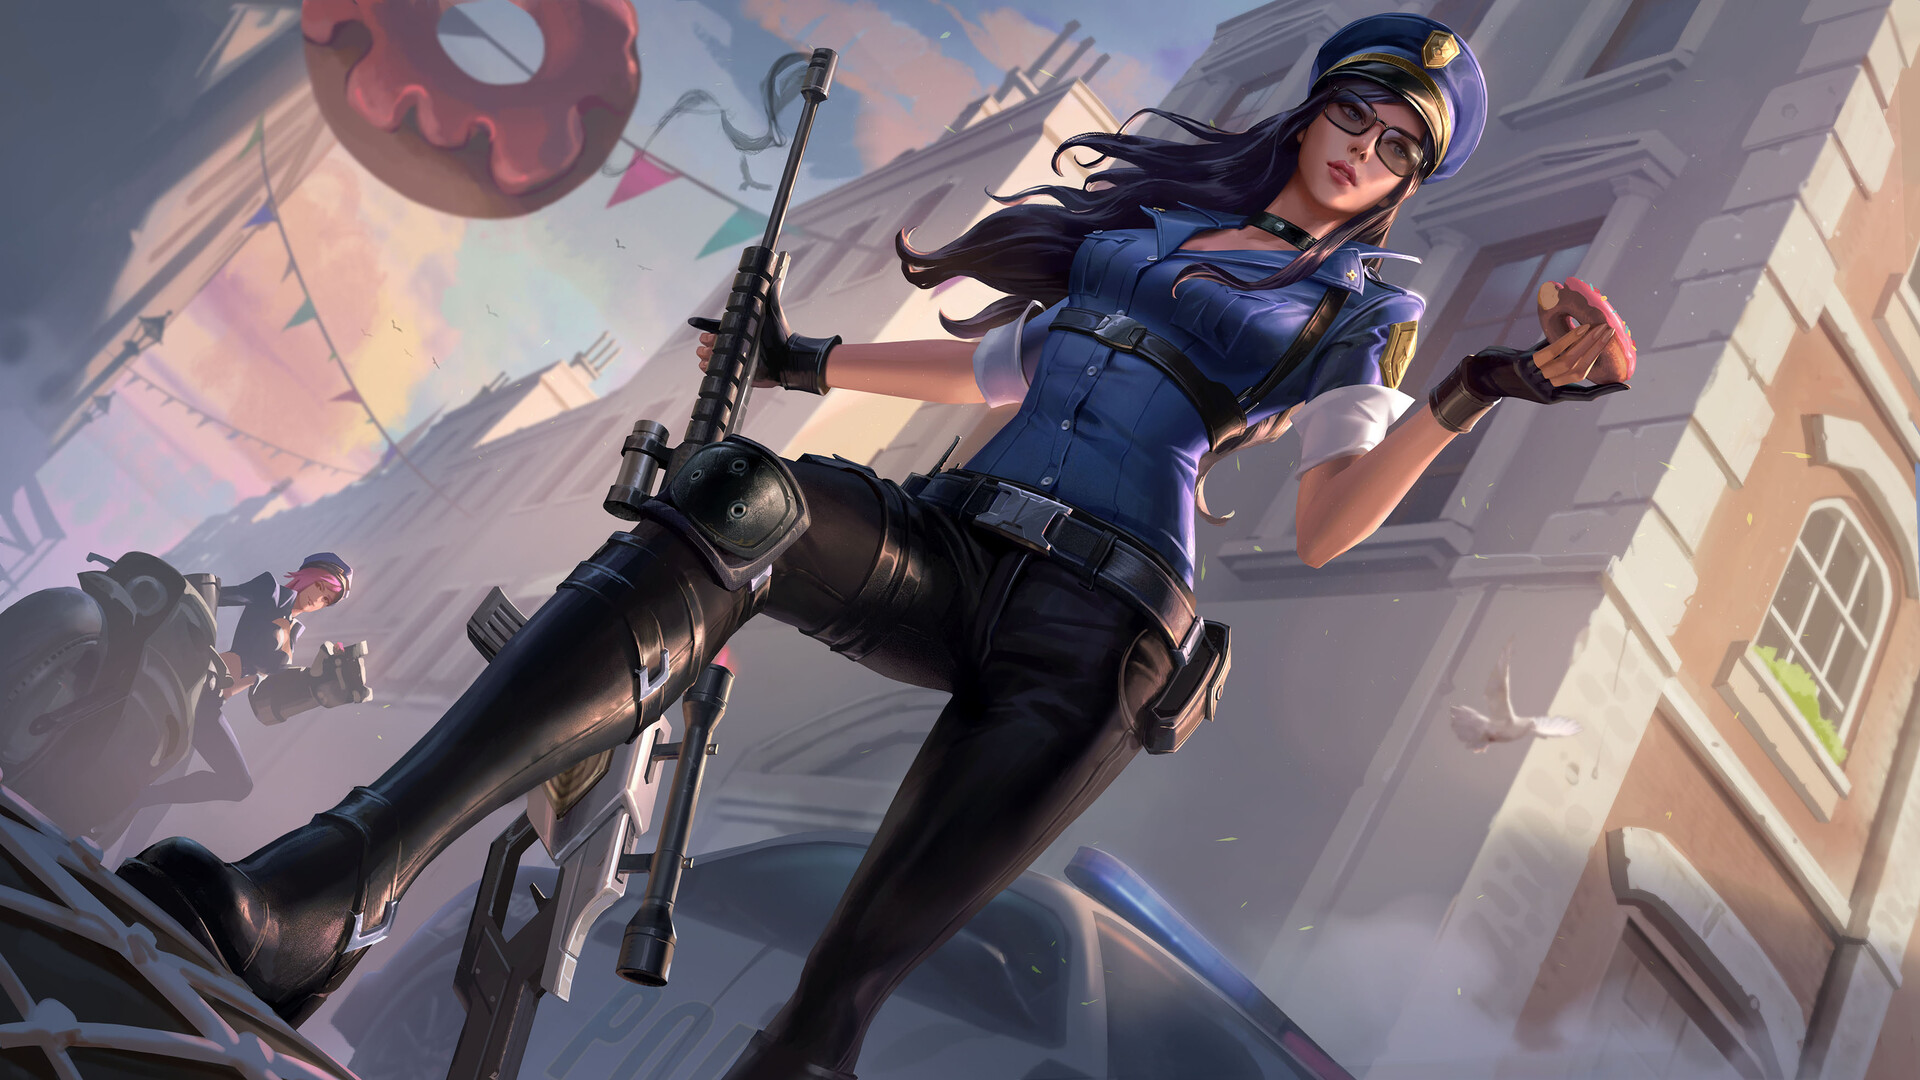 General 1920x1080 Edward Chee drawing League of Legends Caitlyn (League of Legends) women police costume low-angle weapon sniper rifle city Vi (League of Legends) donut